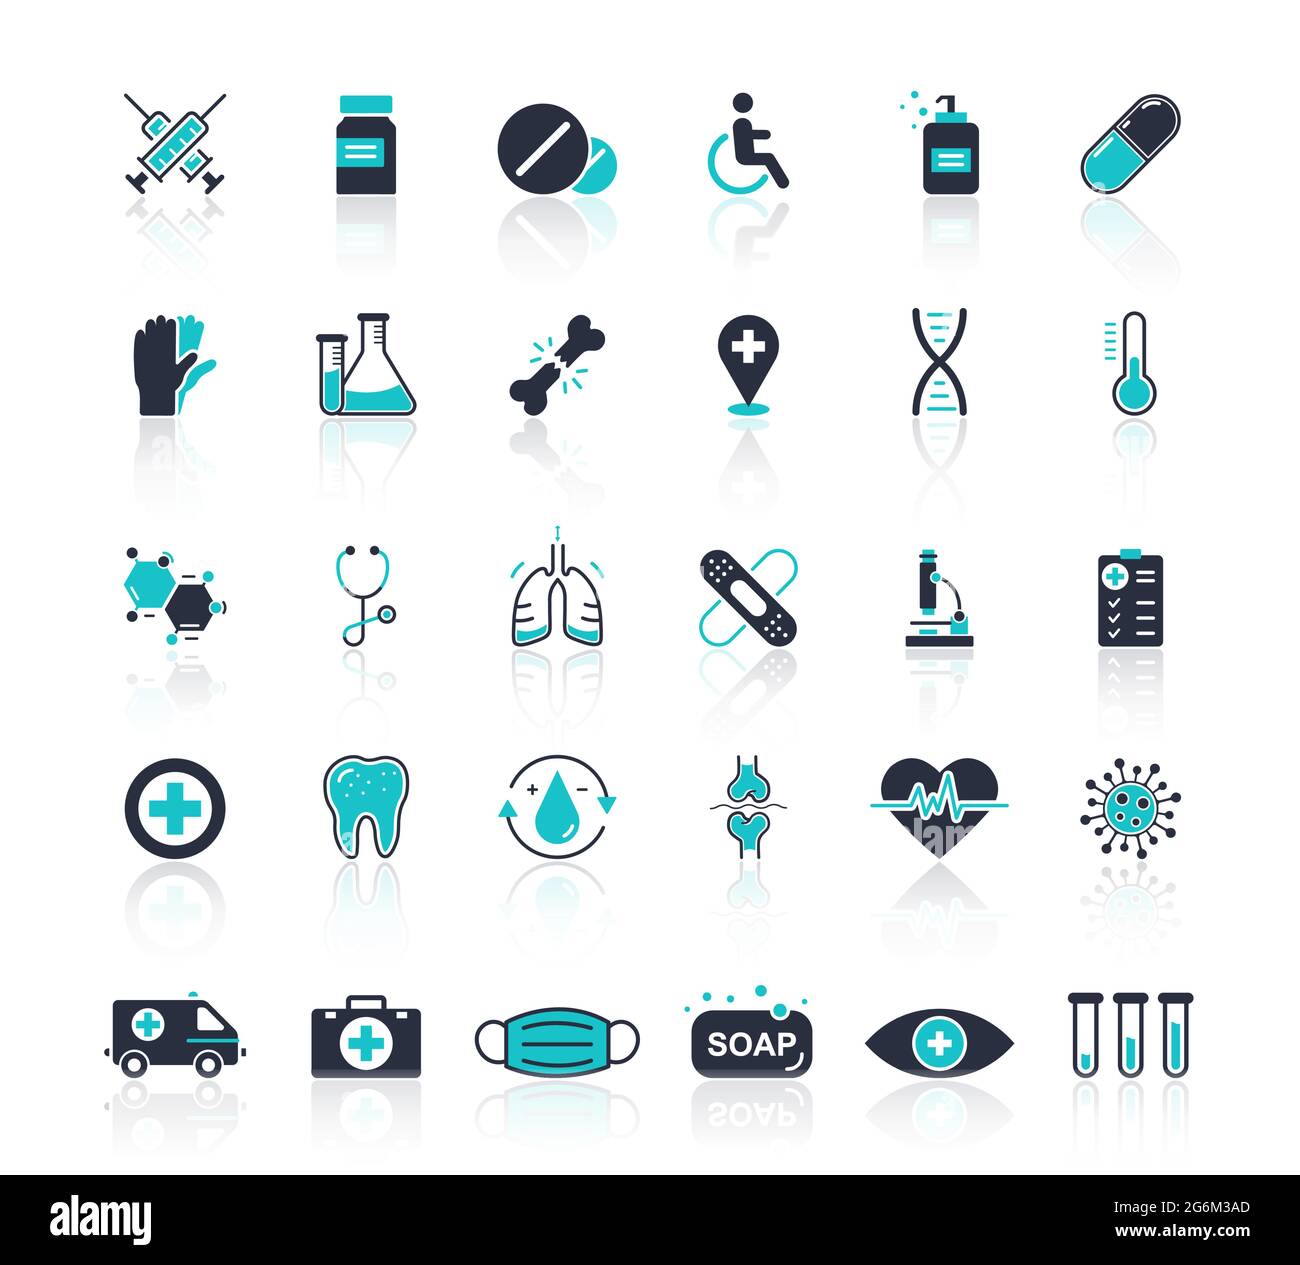 Thin line icons set of hospitals and medical care. Flat design of medicine, pharmacology, oncology, blood, medical ethics with elements for mobile con Stock Vector